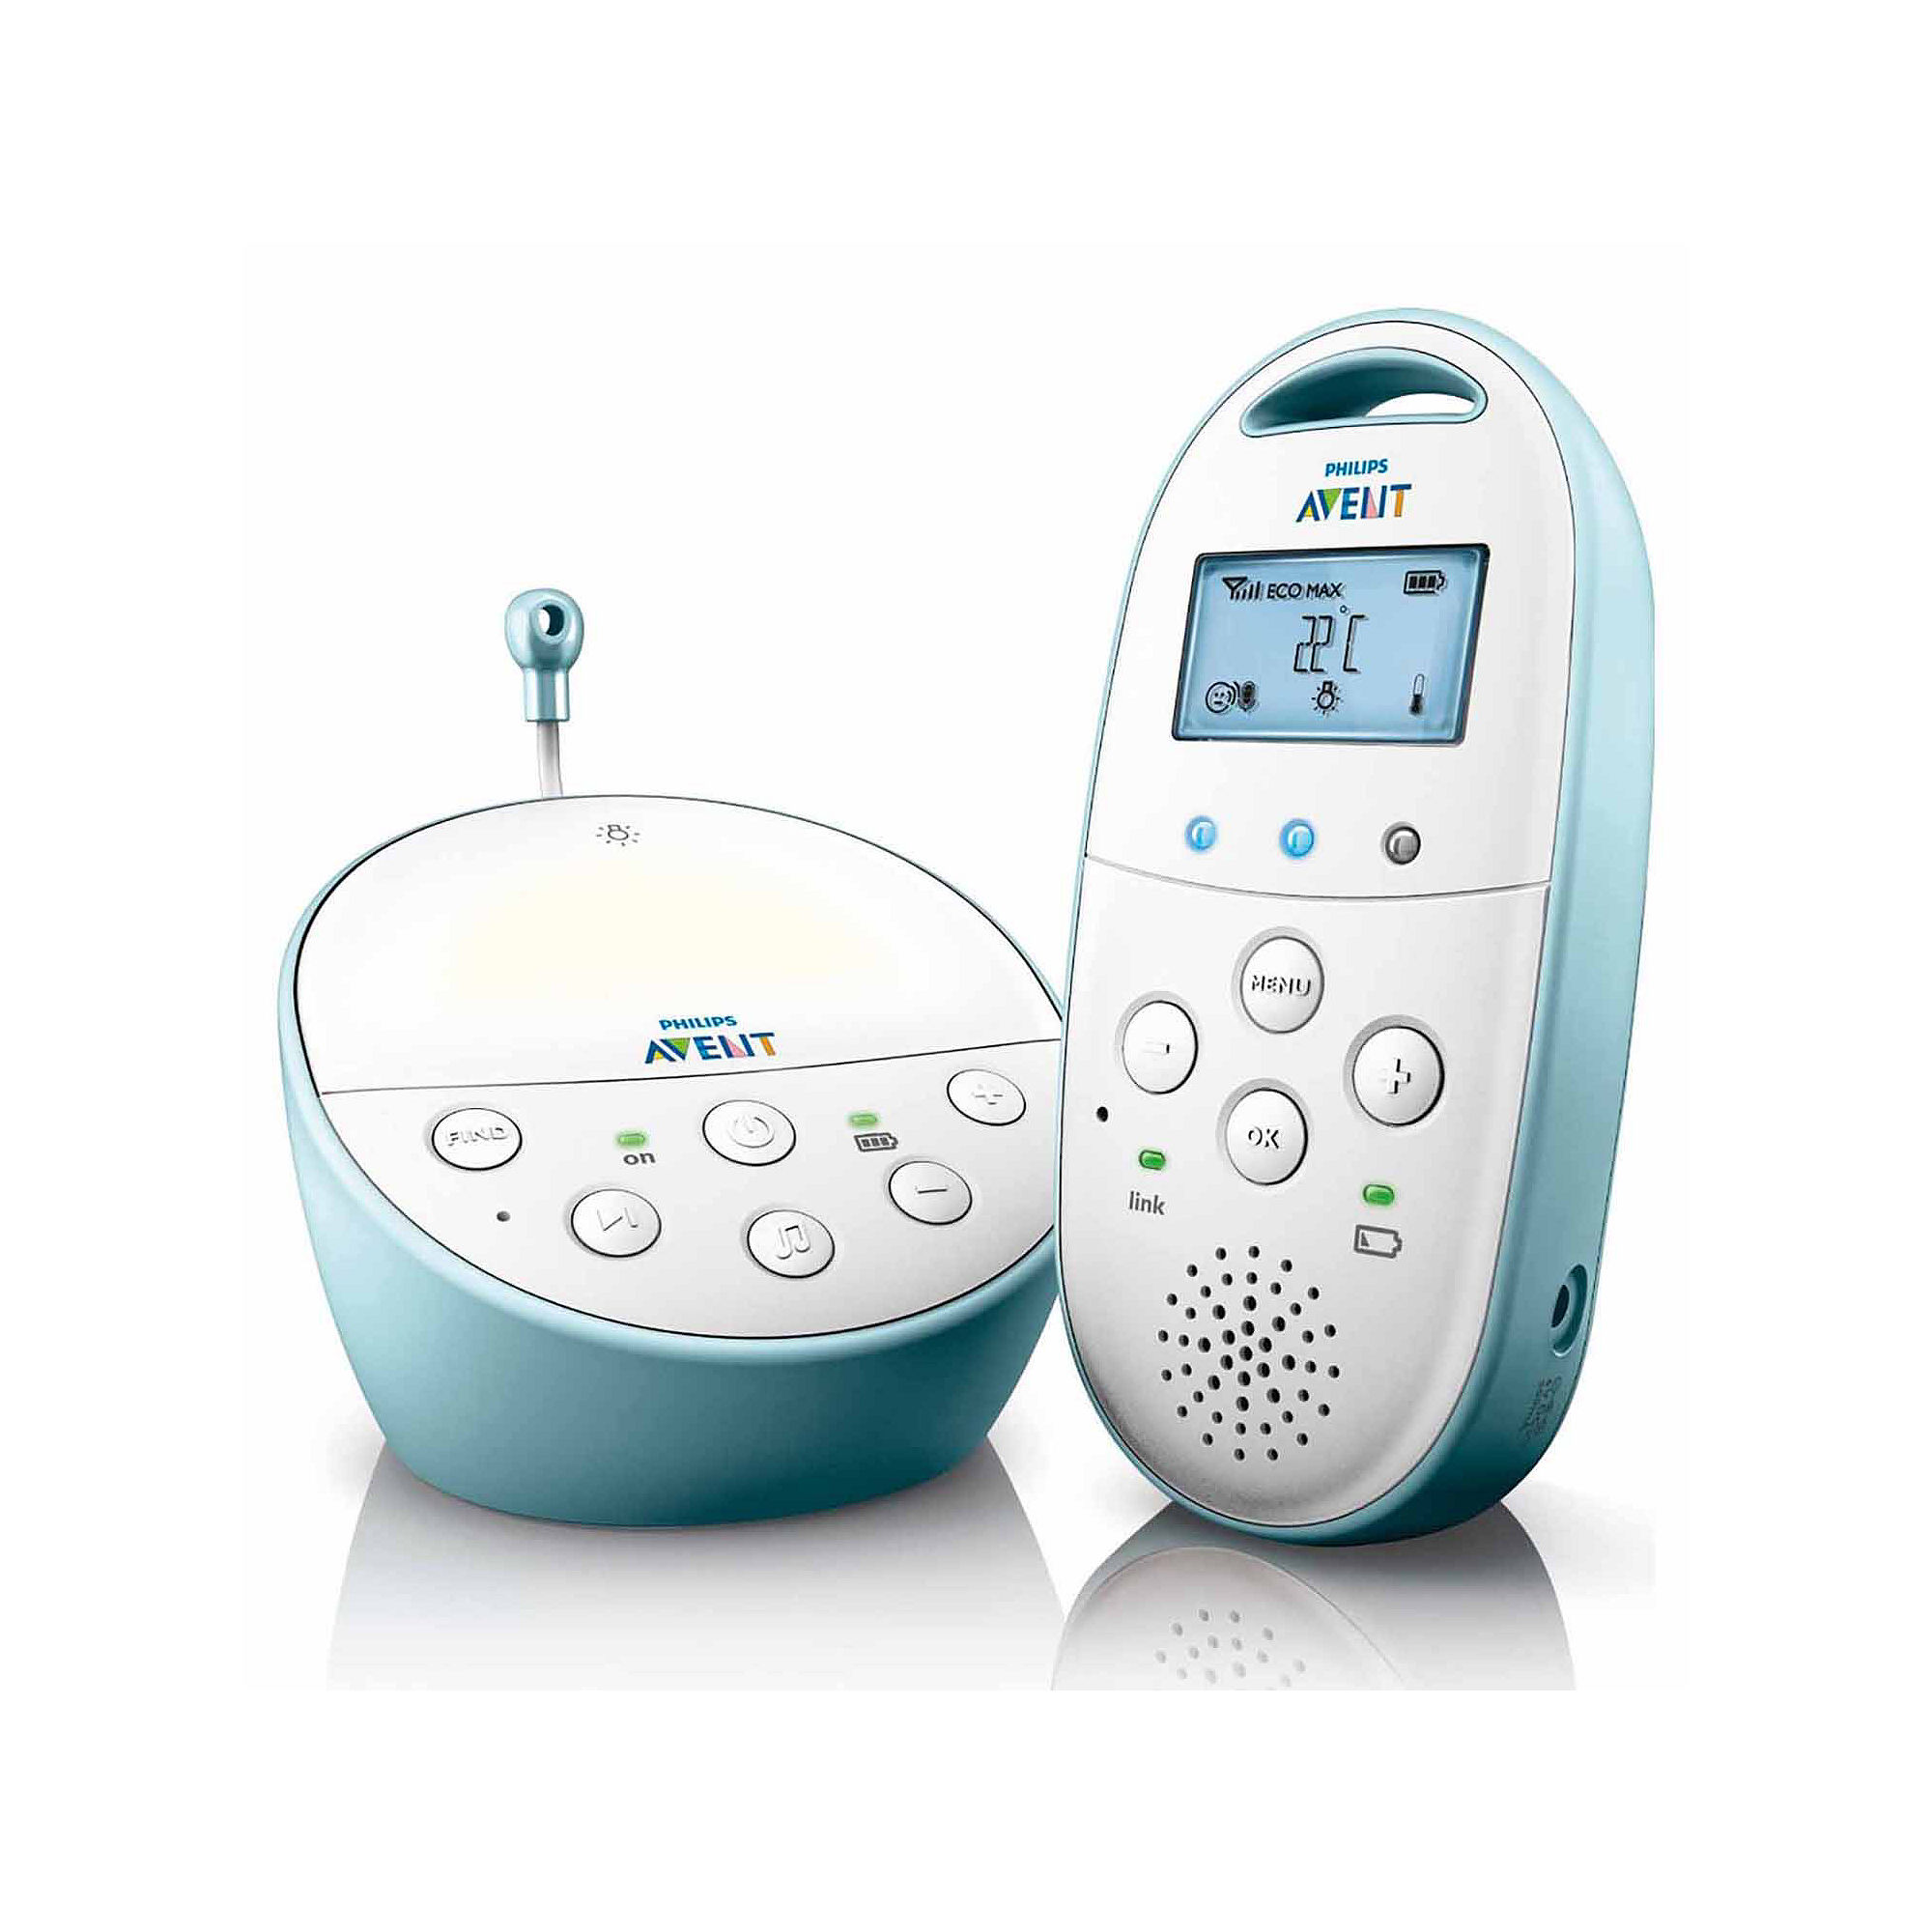 Philips Avent Dect Audio Baby Monitor SCD560/10 (Discontinued by Manufacturer) - image 4 of 4